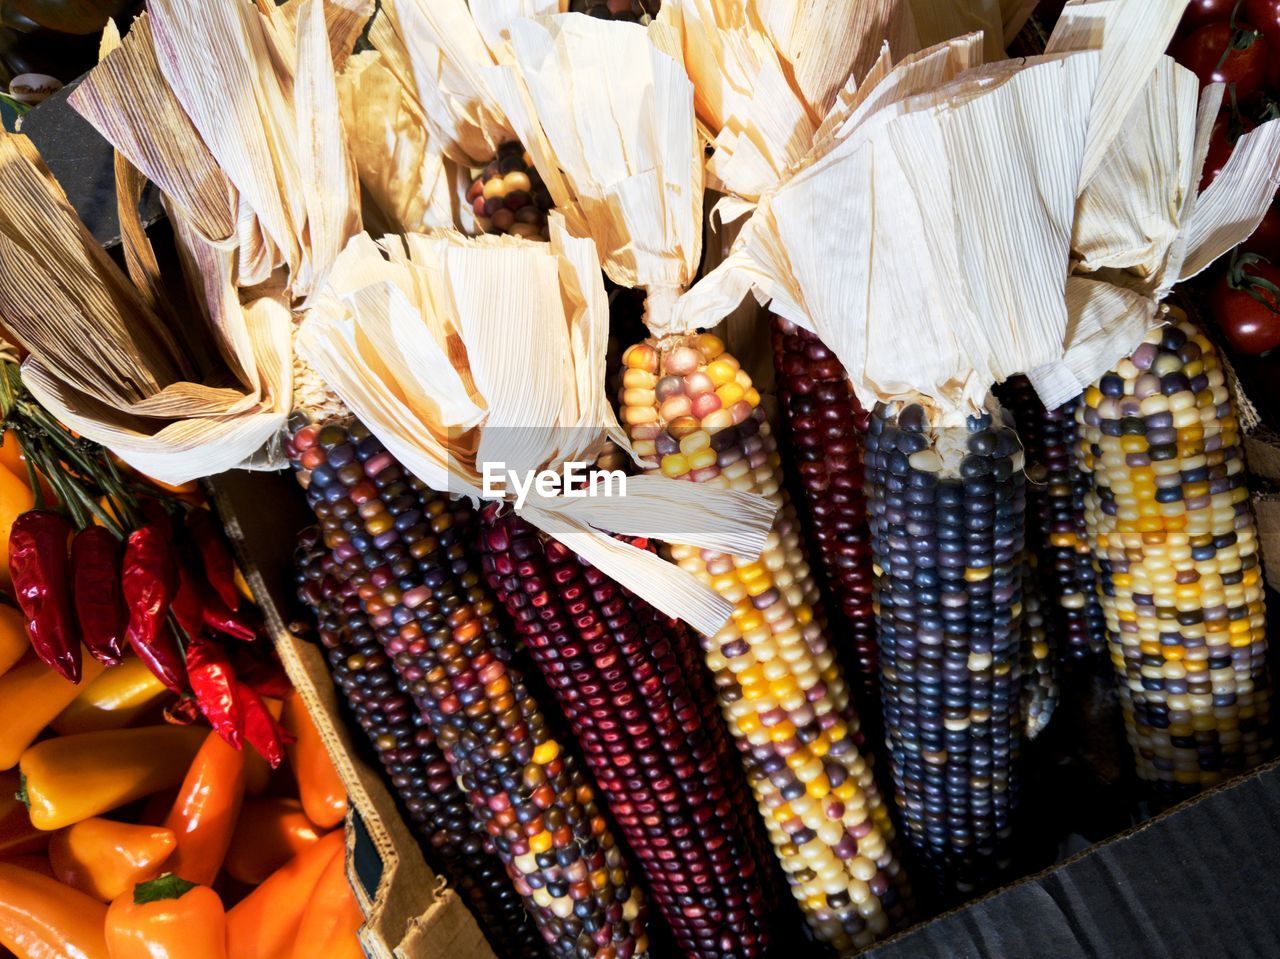 Close-up of corn and peppers for sale in flea market